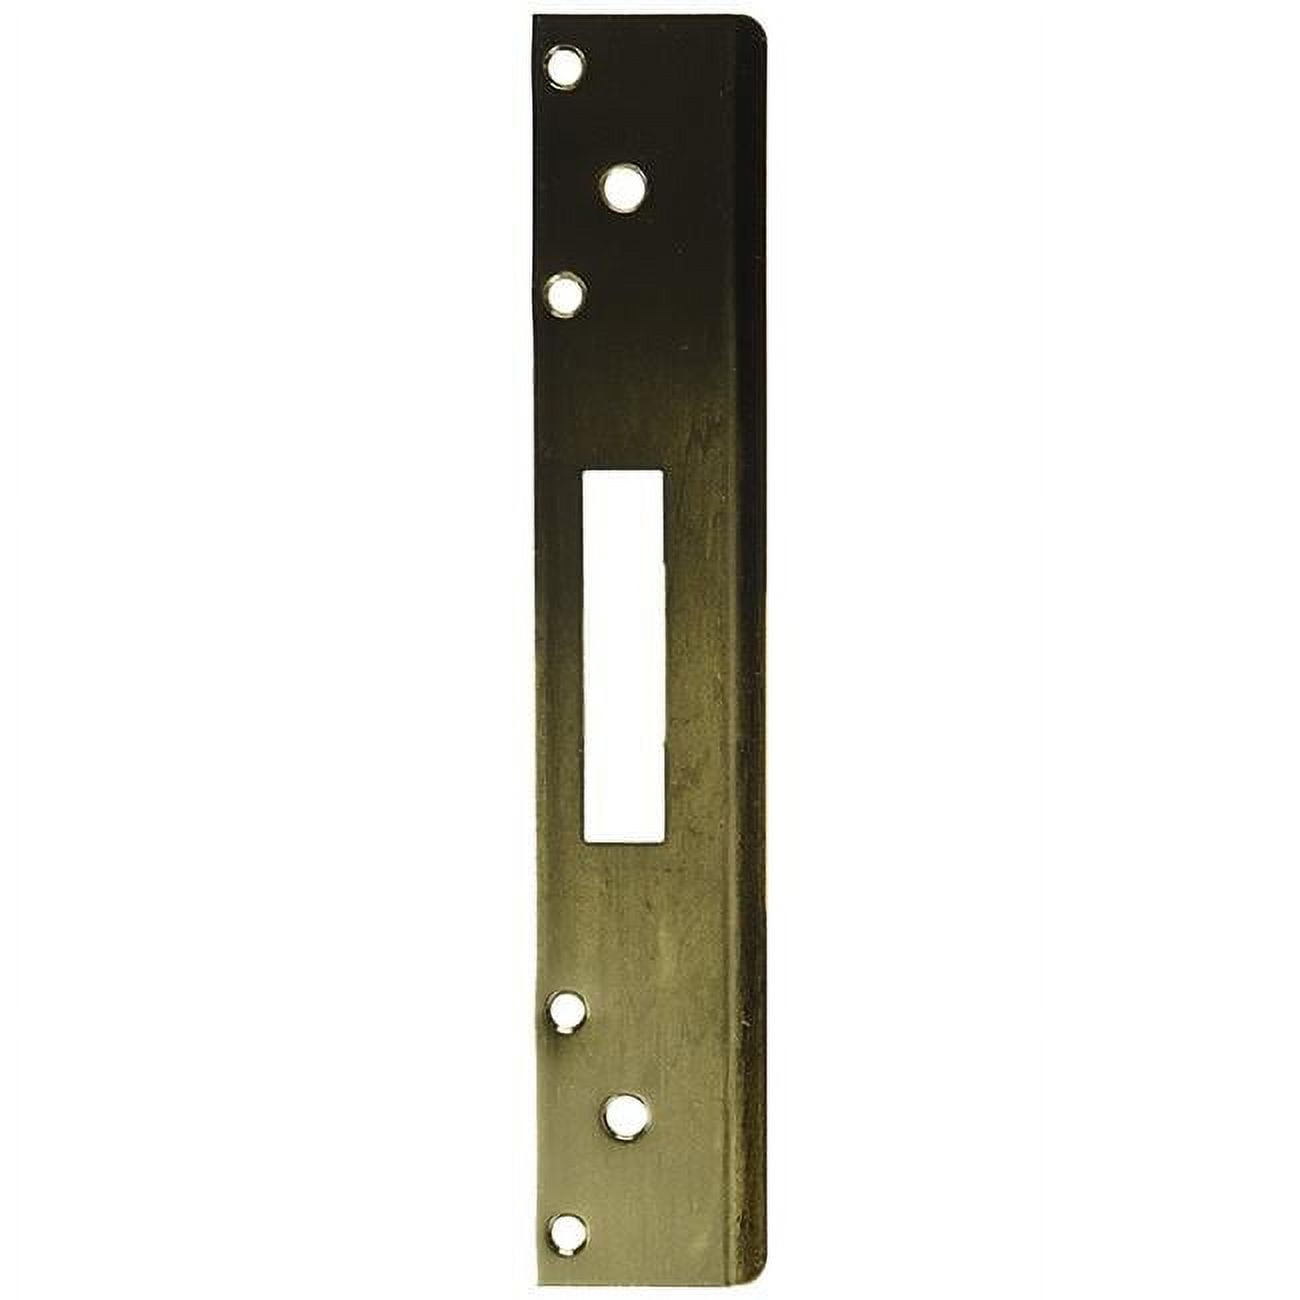 FL 212W4-WH 12 in. Full Lip High Security Strike with 4 in. CTC Latch Holes, White Coated -  Don-Jo Manufacturing, FL 212W4 WH